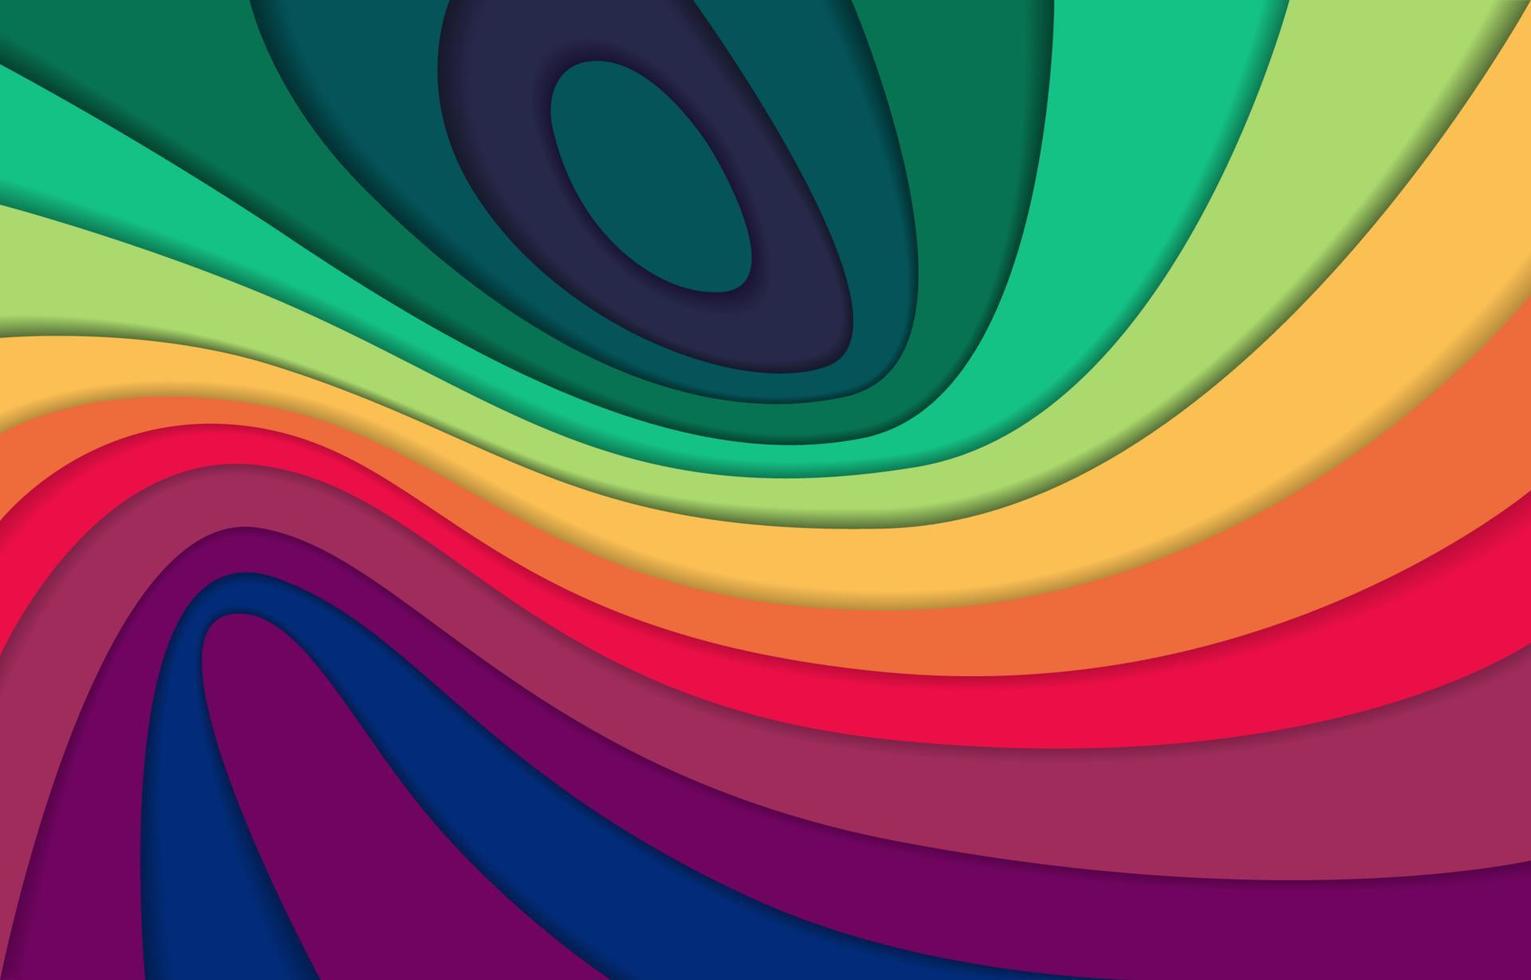 Rainbow Colored Wave vector